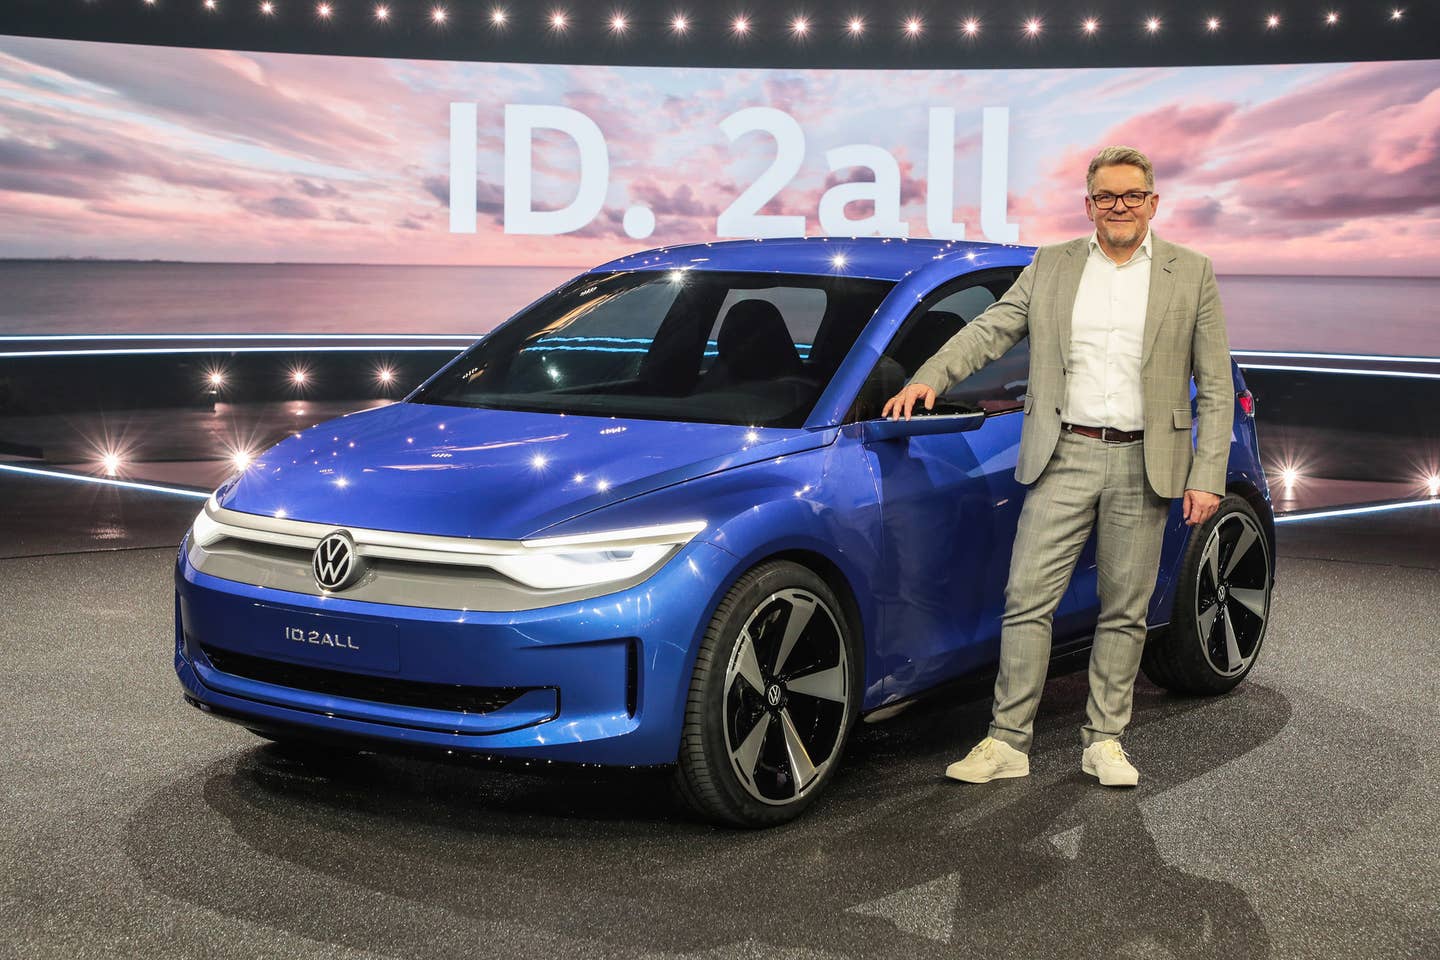 Volkswagen’s ID. 2ALL Thought Is a ,000 EV Hatchback You’d Acutally Wish to Force